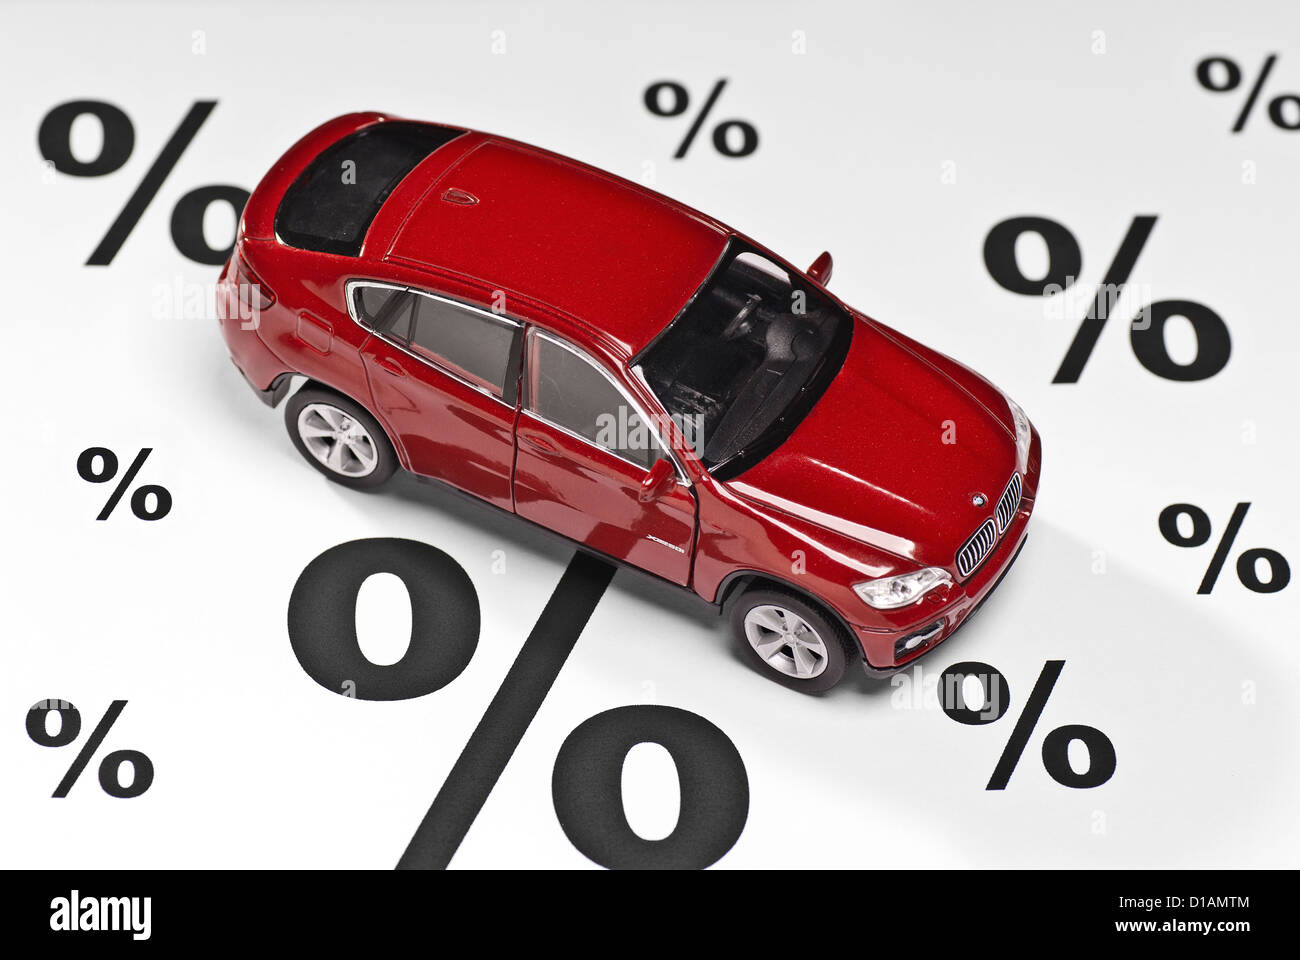 Car with percent sign as symbol for discounts when buying a car. Stock Photo